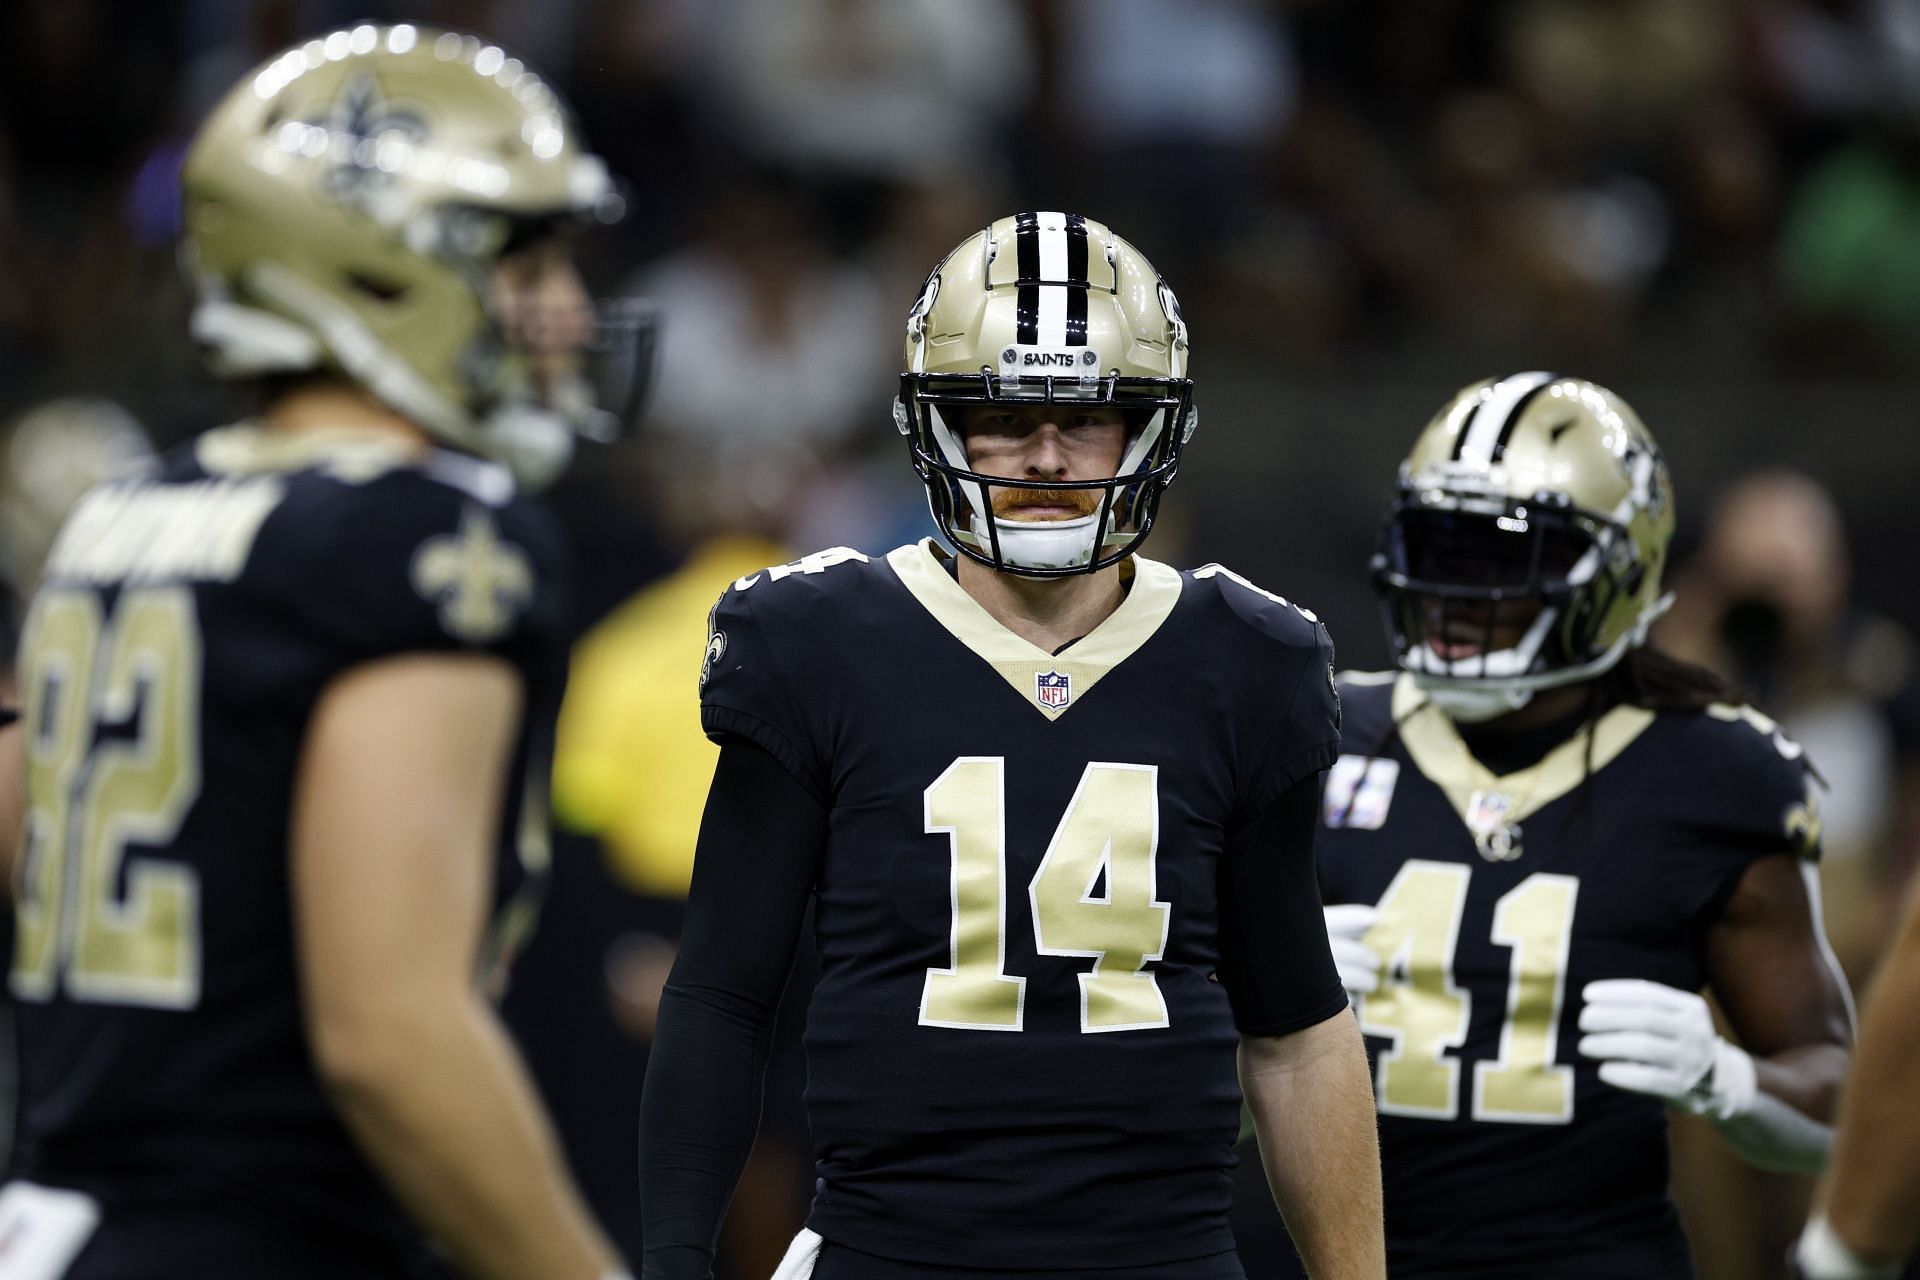 Who is the New Orleans Saints starting QB tonight?